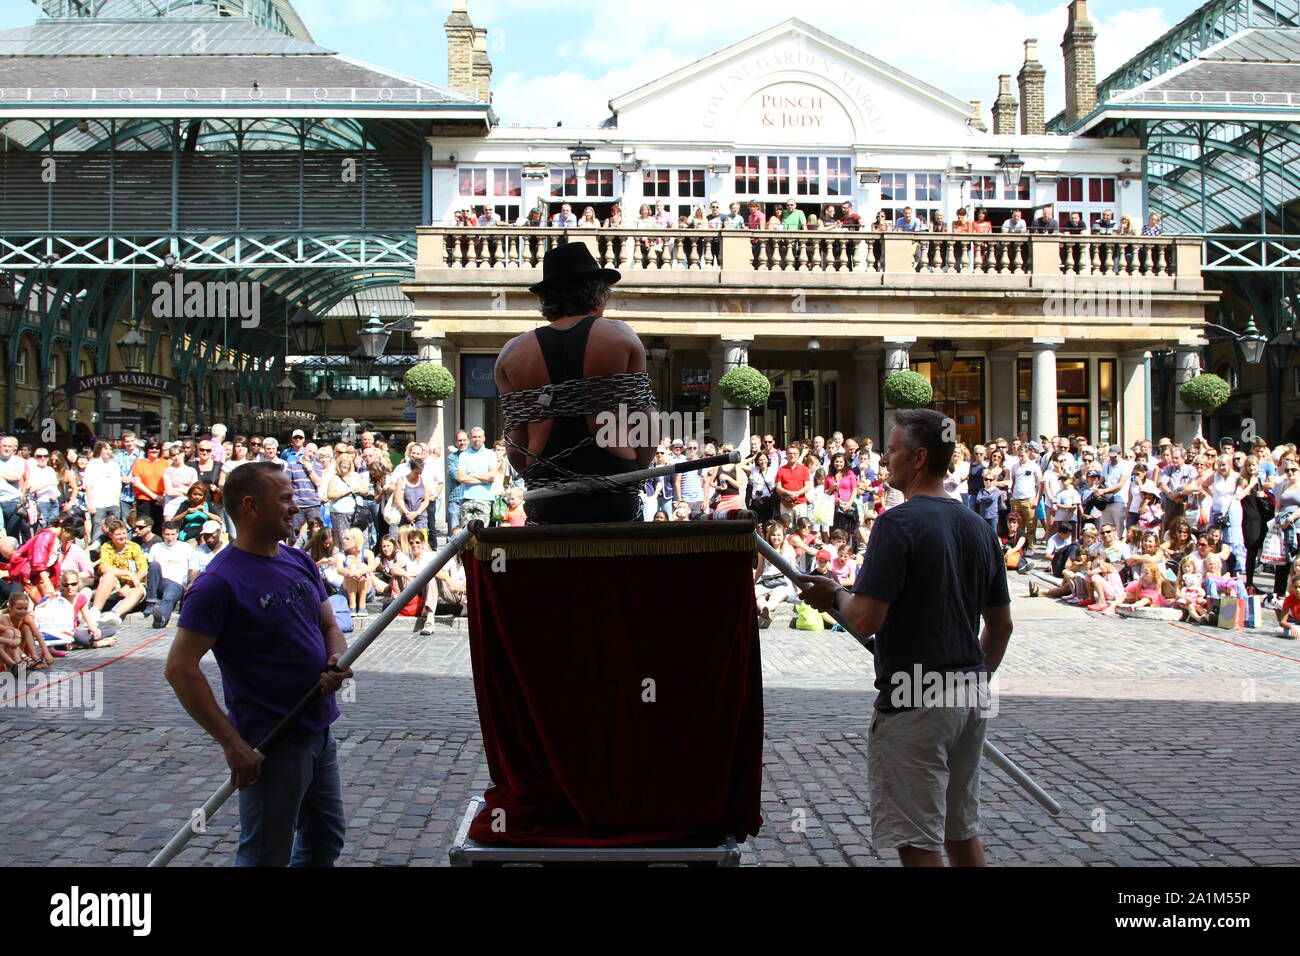 Authentic imagery in Covent Garden, London. The street Entertainer has the attention of the people including the patrons of the Punch and Judy pub on the terrace. Stock Photo